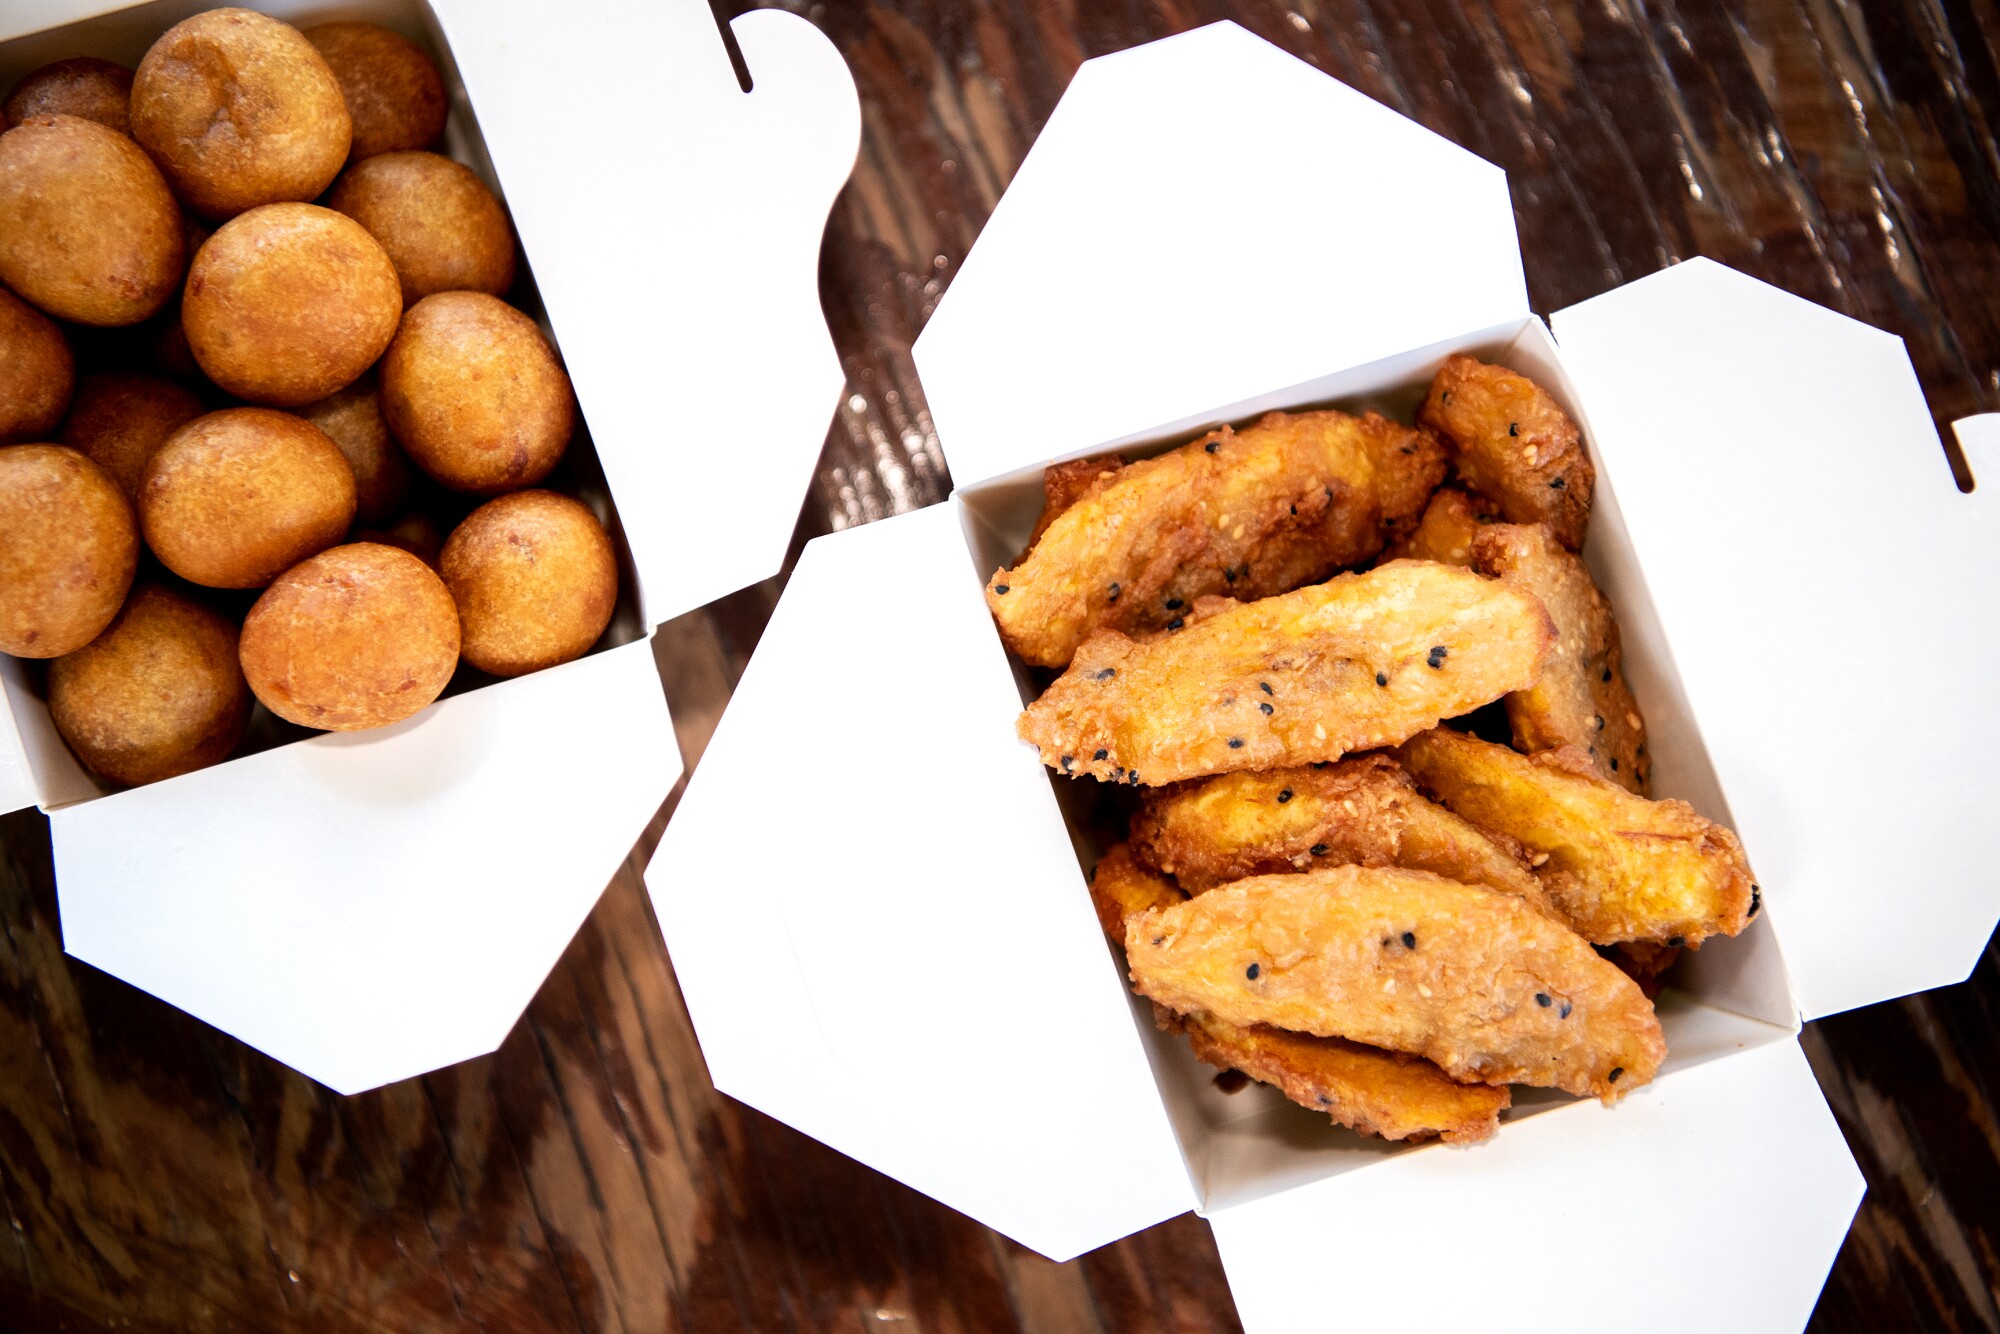 The cardboard boxes contain two kinds of fried desserts.